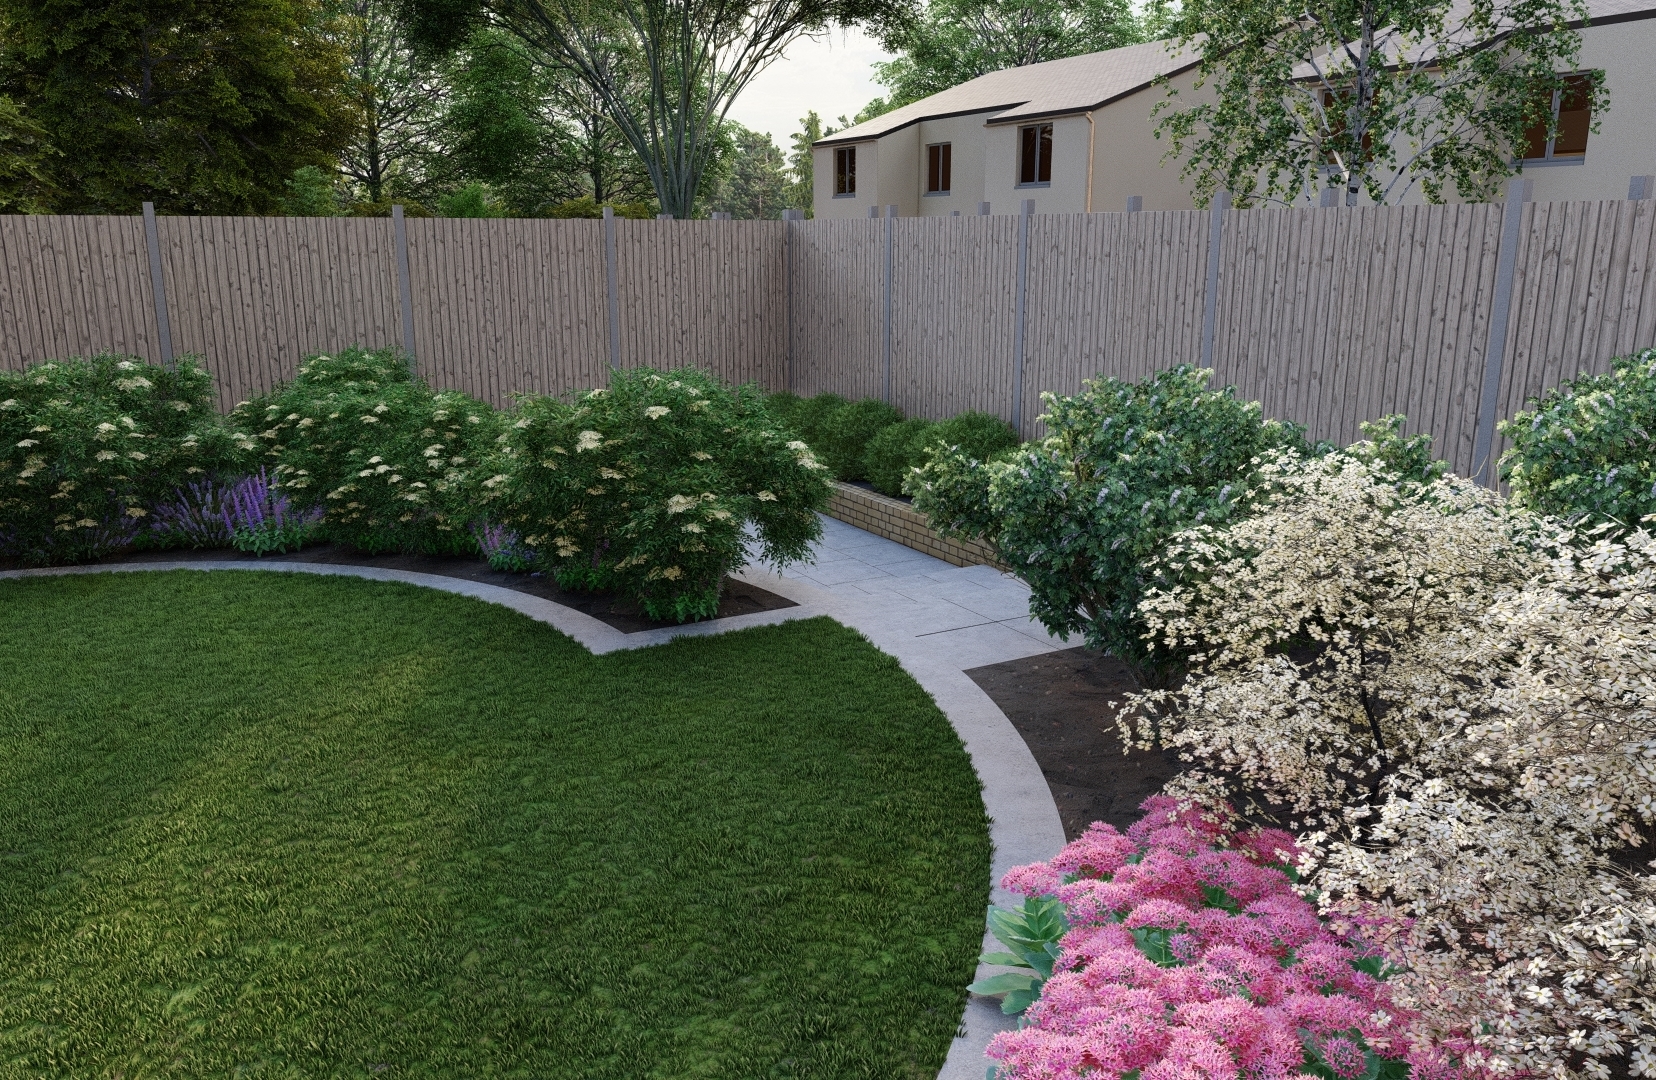 Design Visuals for a large Family Garden in Delgany, Co Wicklow,  featuring several garden elements including Biohort Garden Shed  & Bin Storage, expansive lawn framned by mixed planting borders and a sunken patio area.